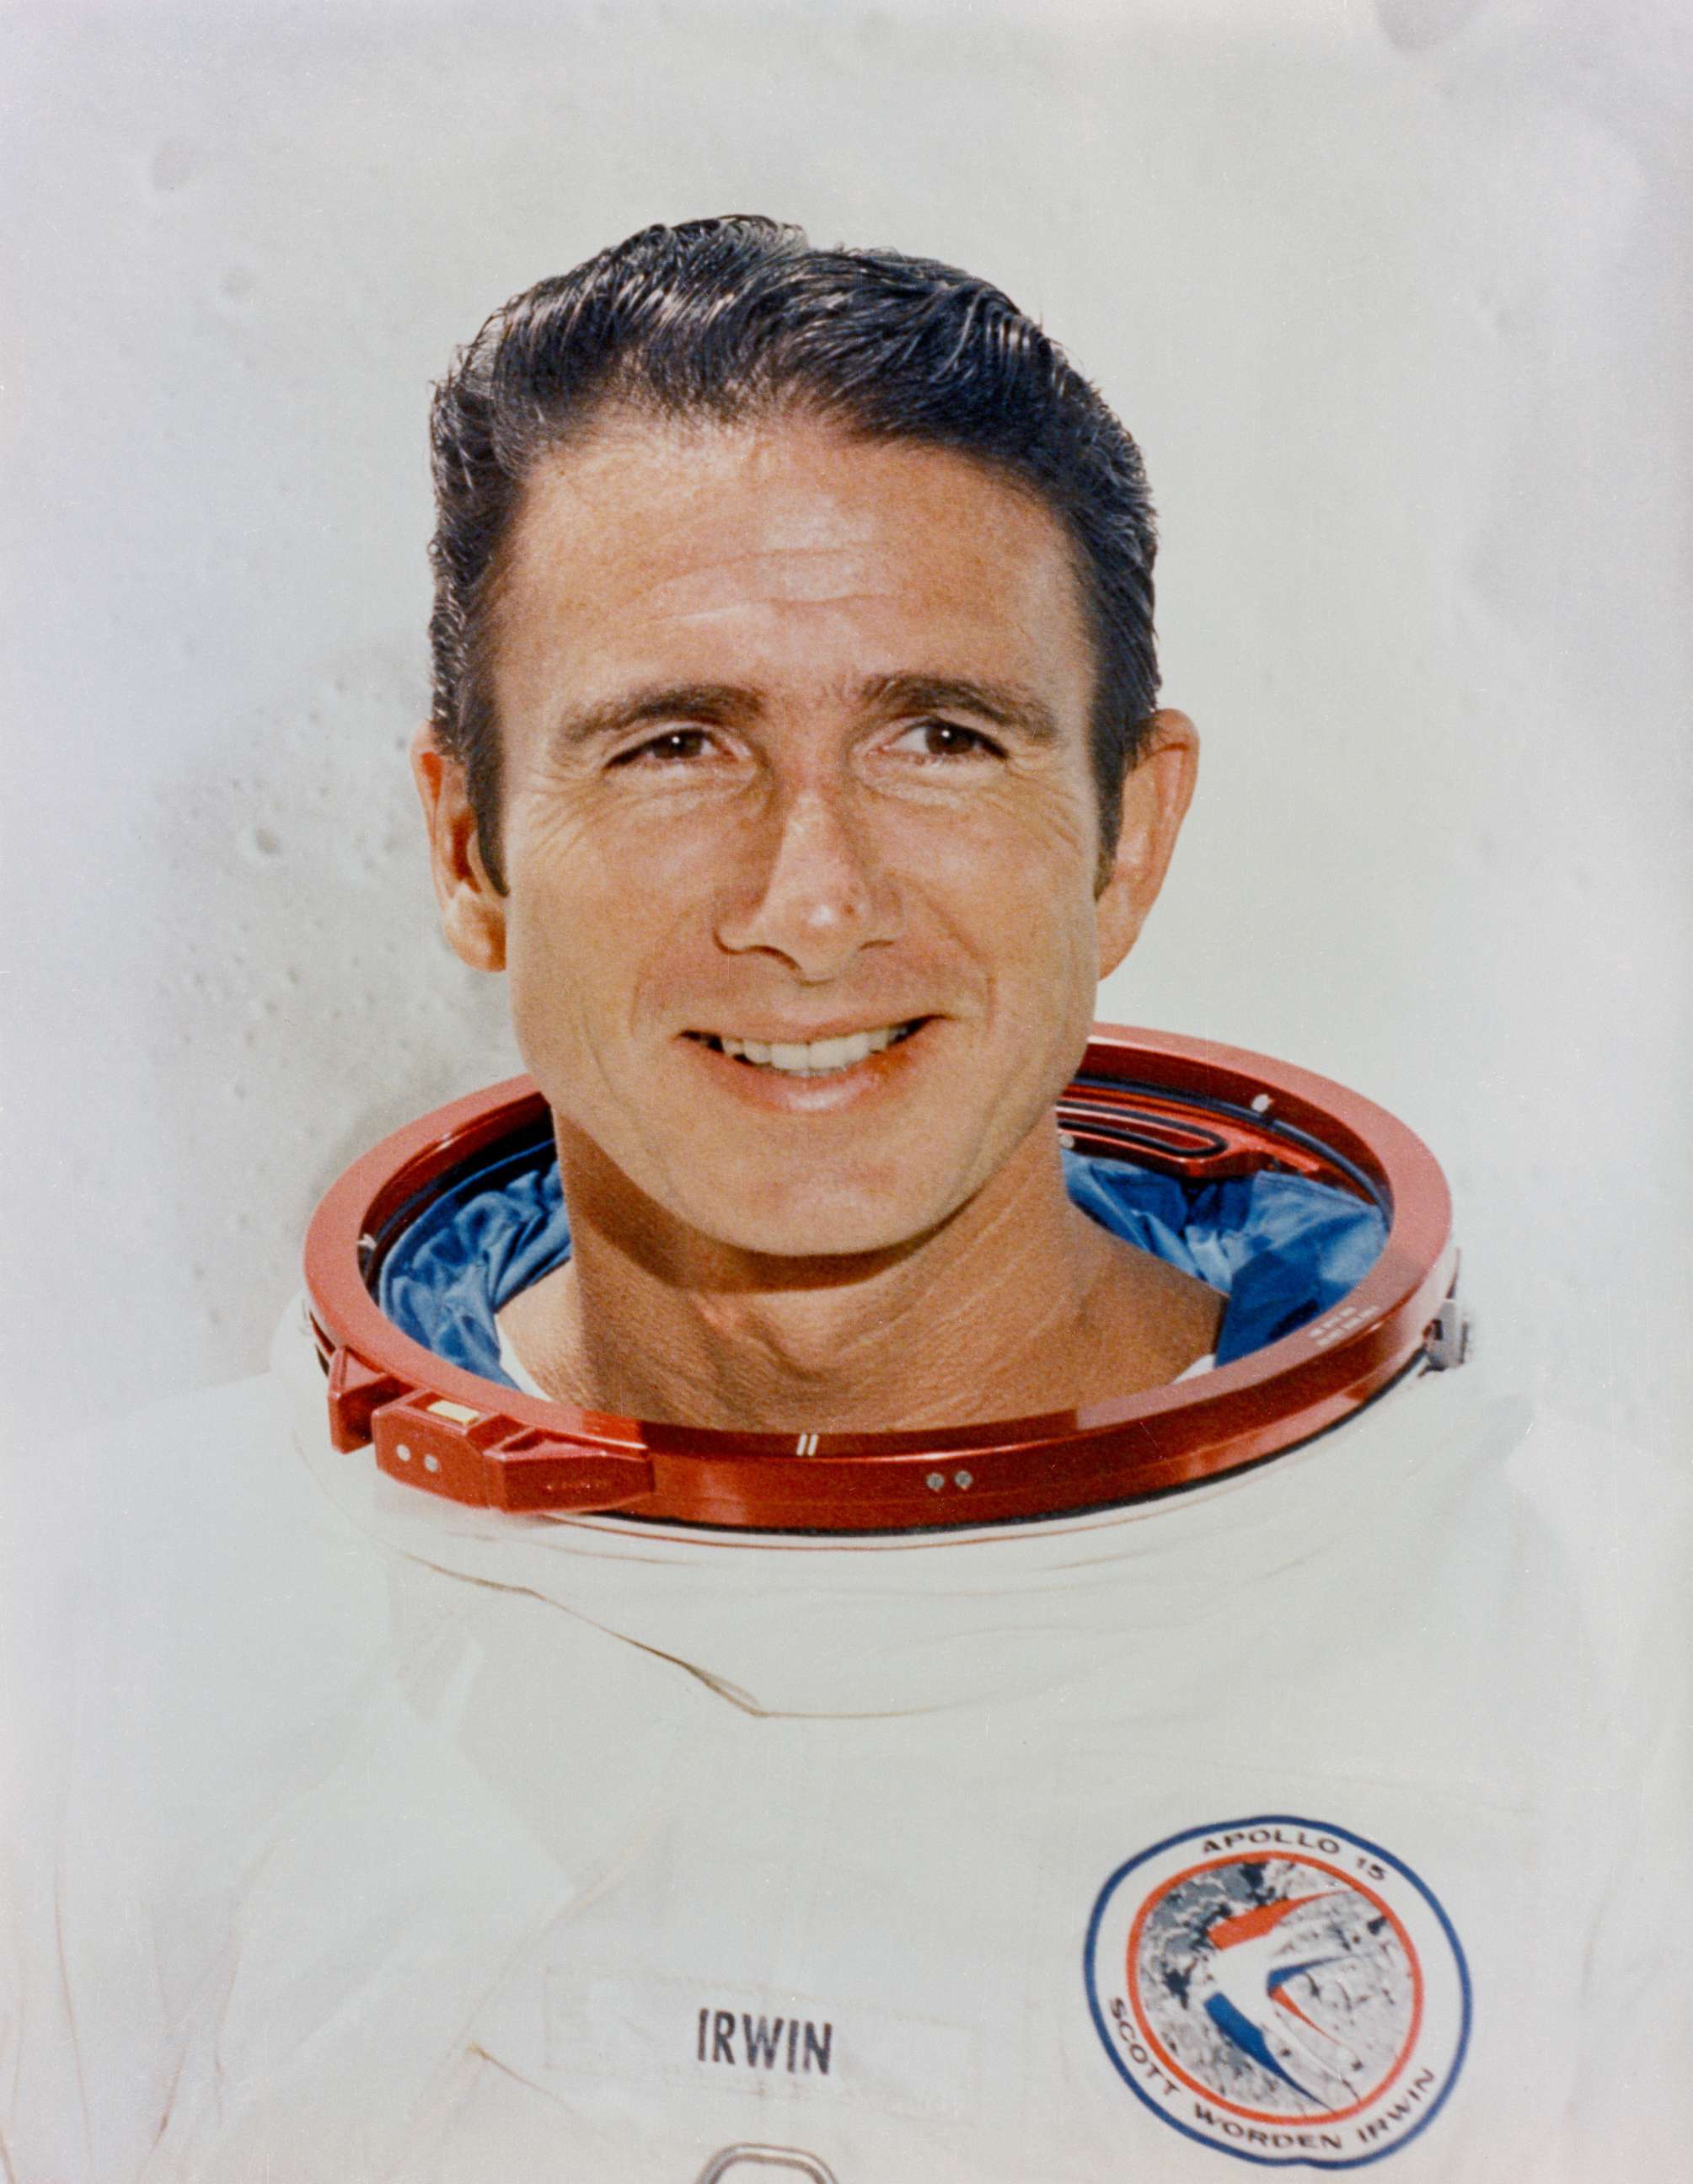 James B. Irwin Picture 12 men who walked on the moon, 196972 ABC News